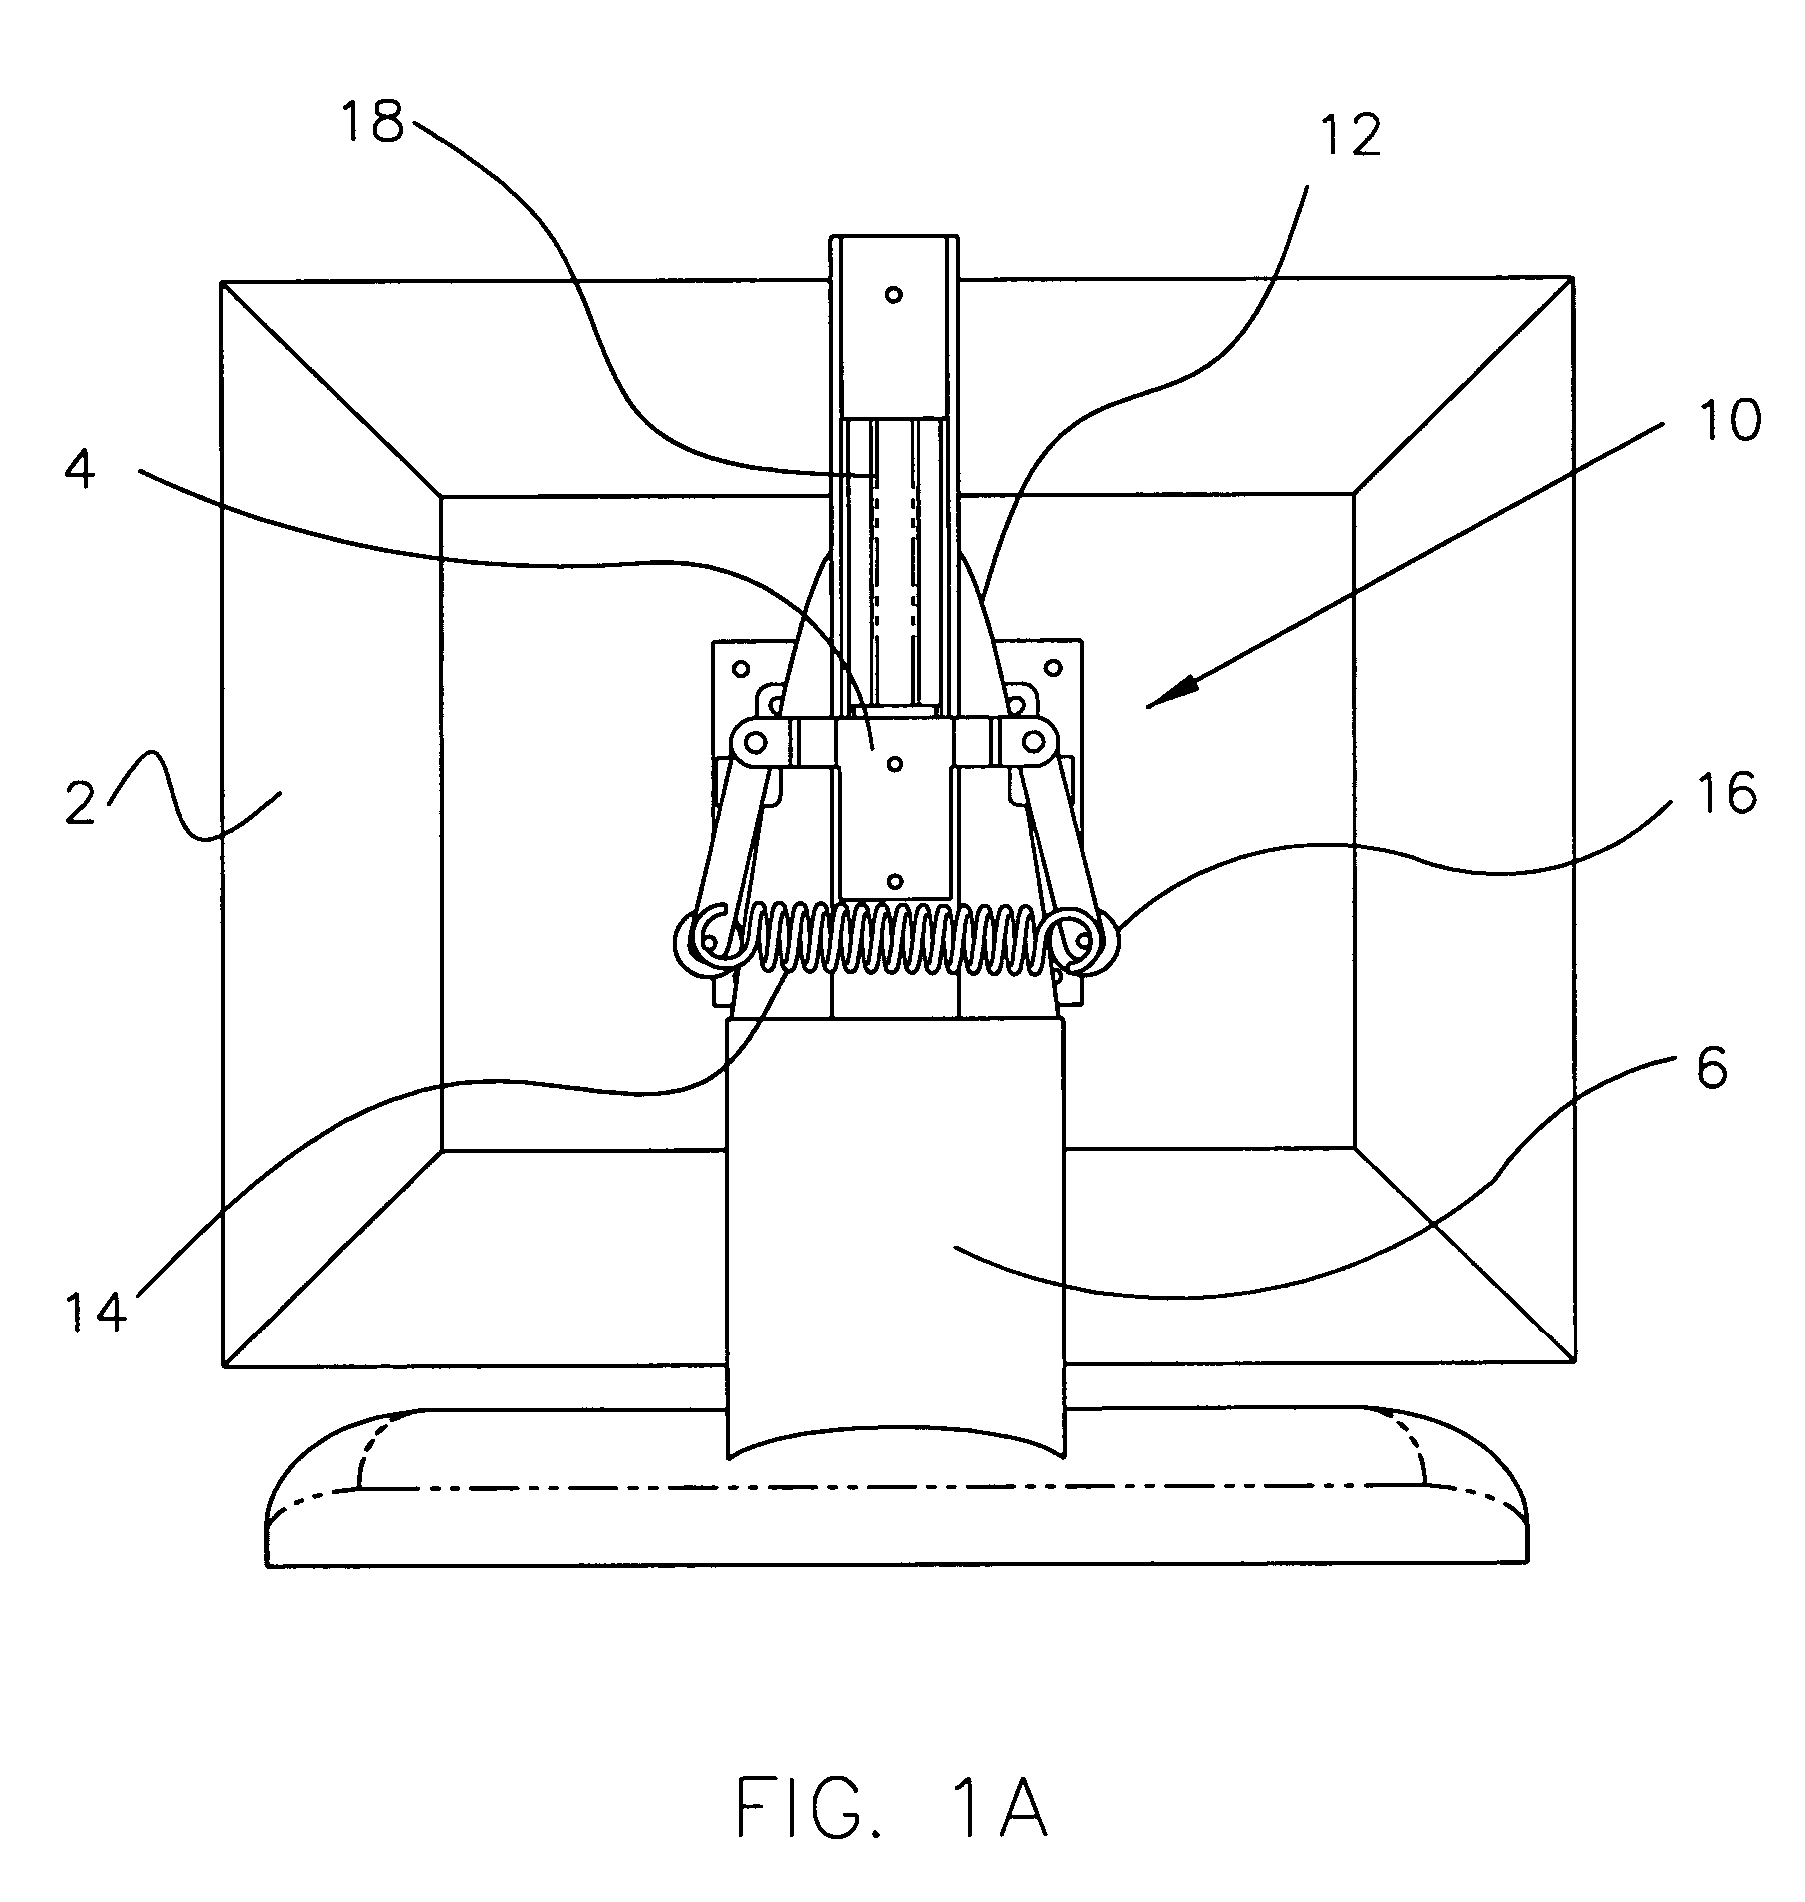 Methods and apparatus for generating force and torque